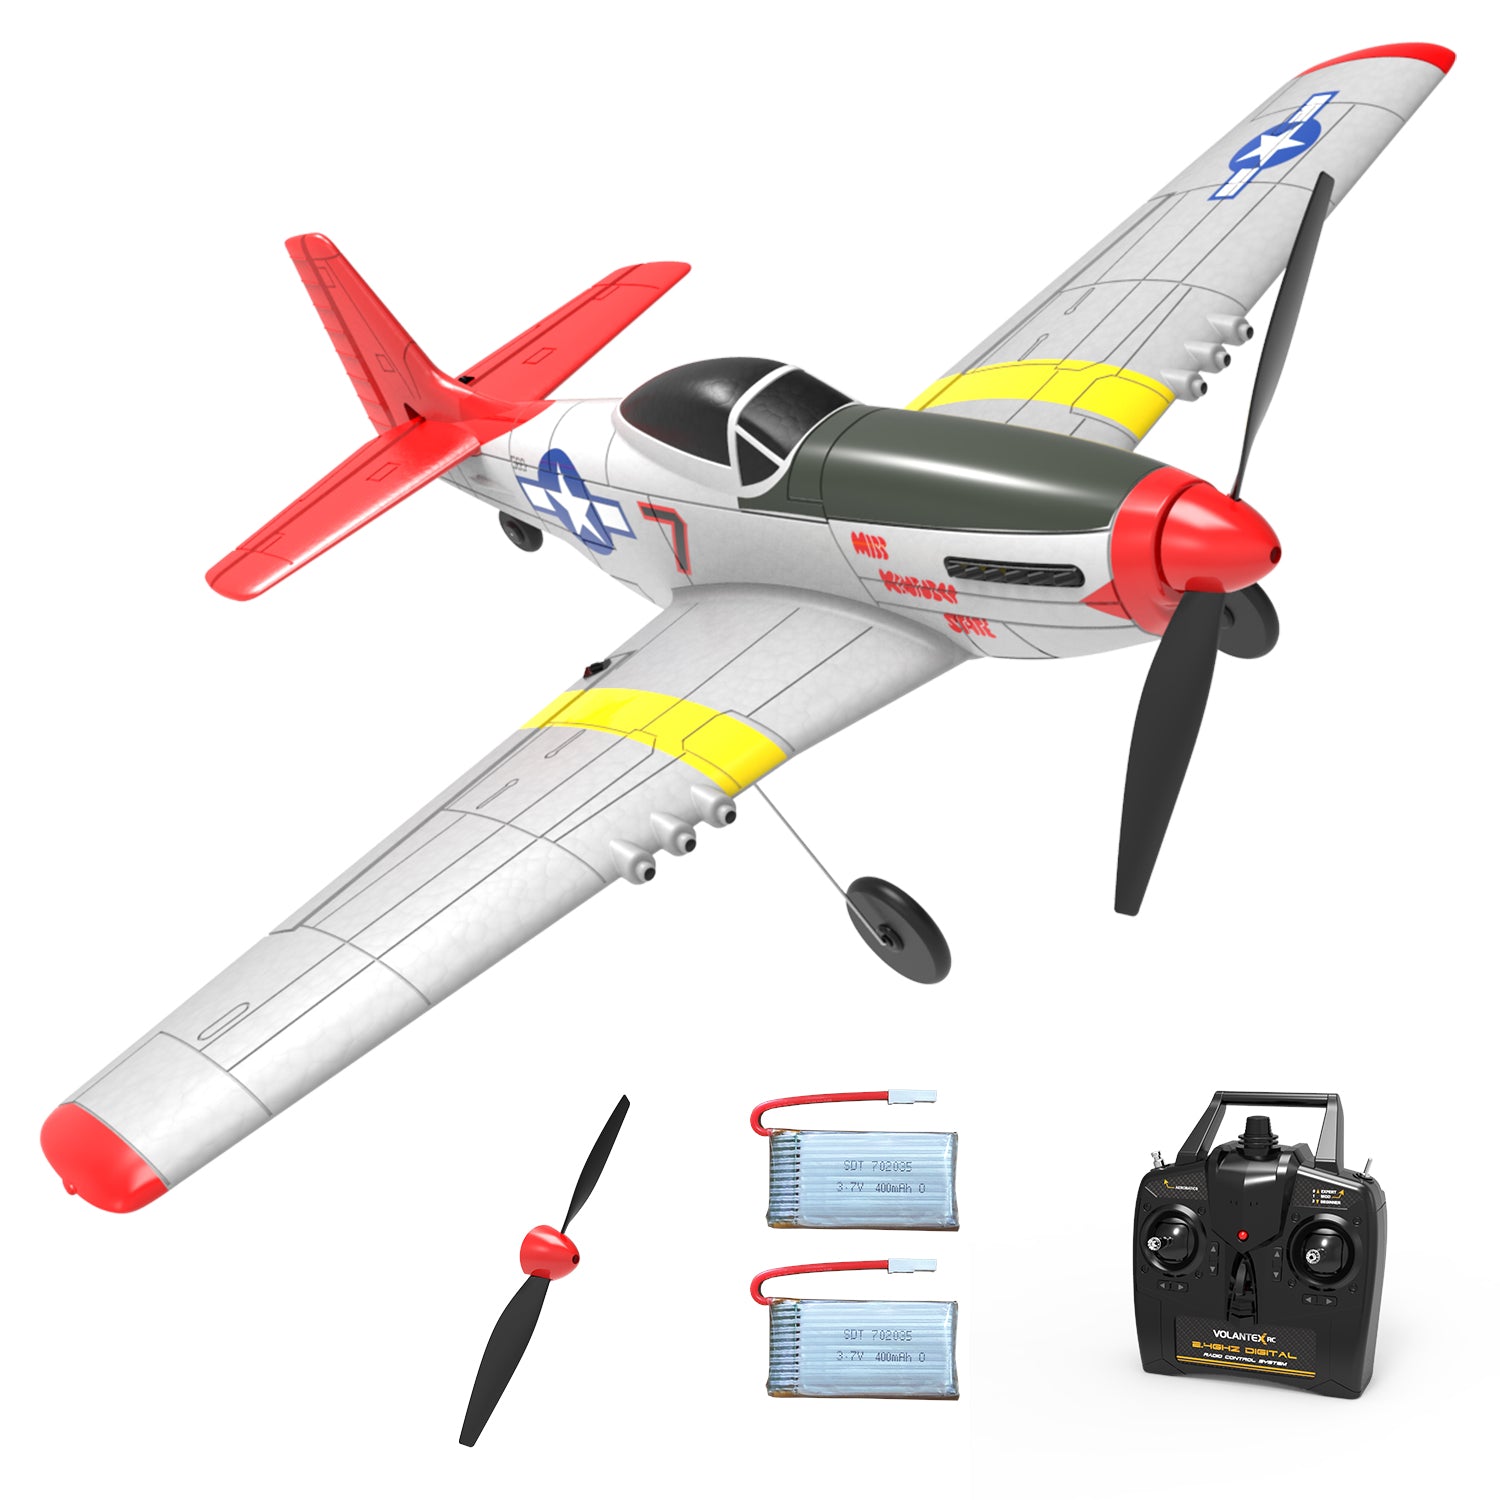 2 Sets Power Engine - 2pcs Gear Box & 2pcs Motor Coreless φ10mm for 4CH Small Planes (Old Version)